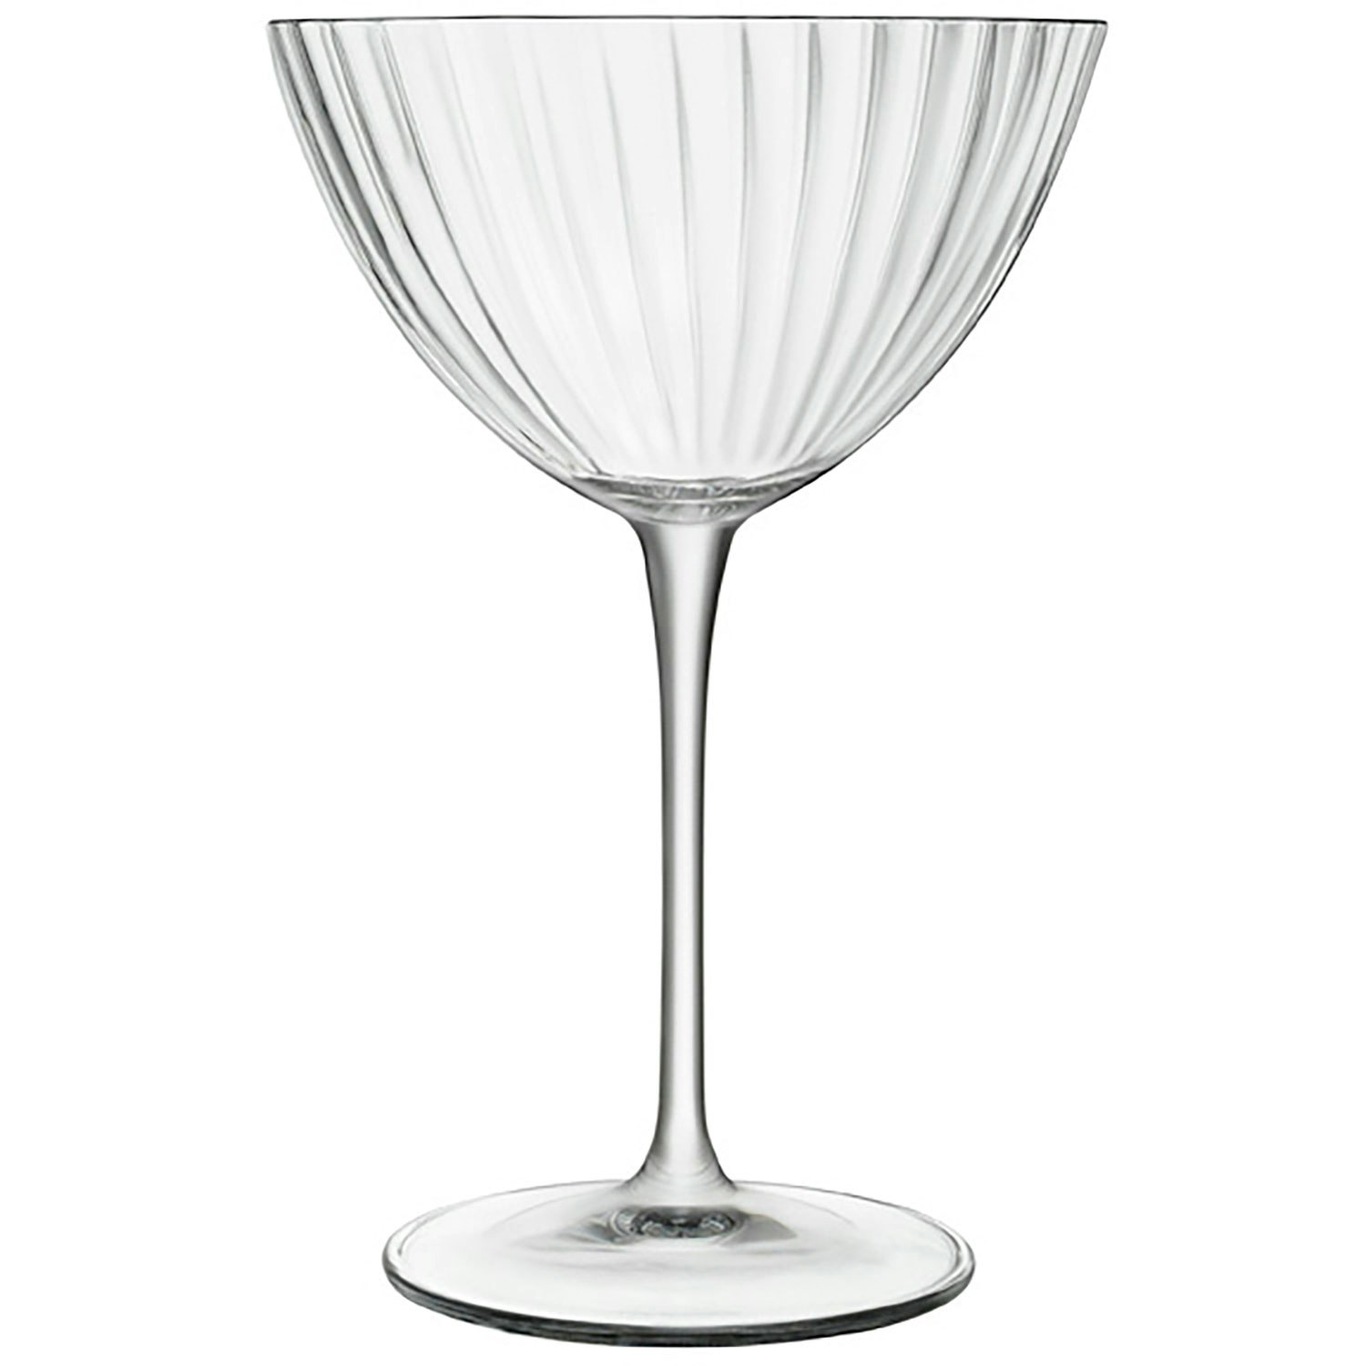 Ribbed Martini Glass - Gold